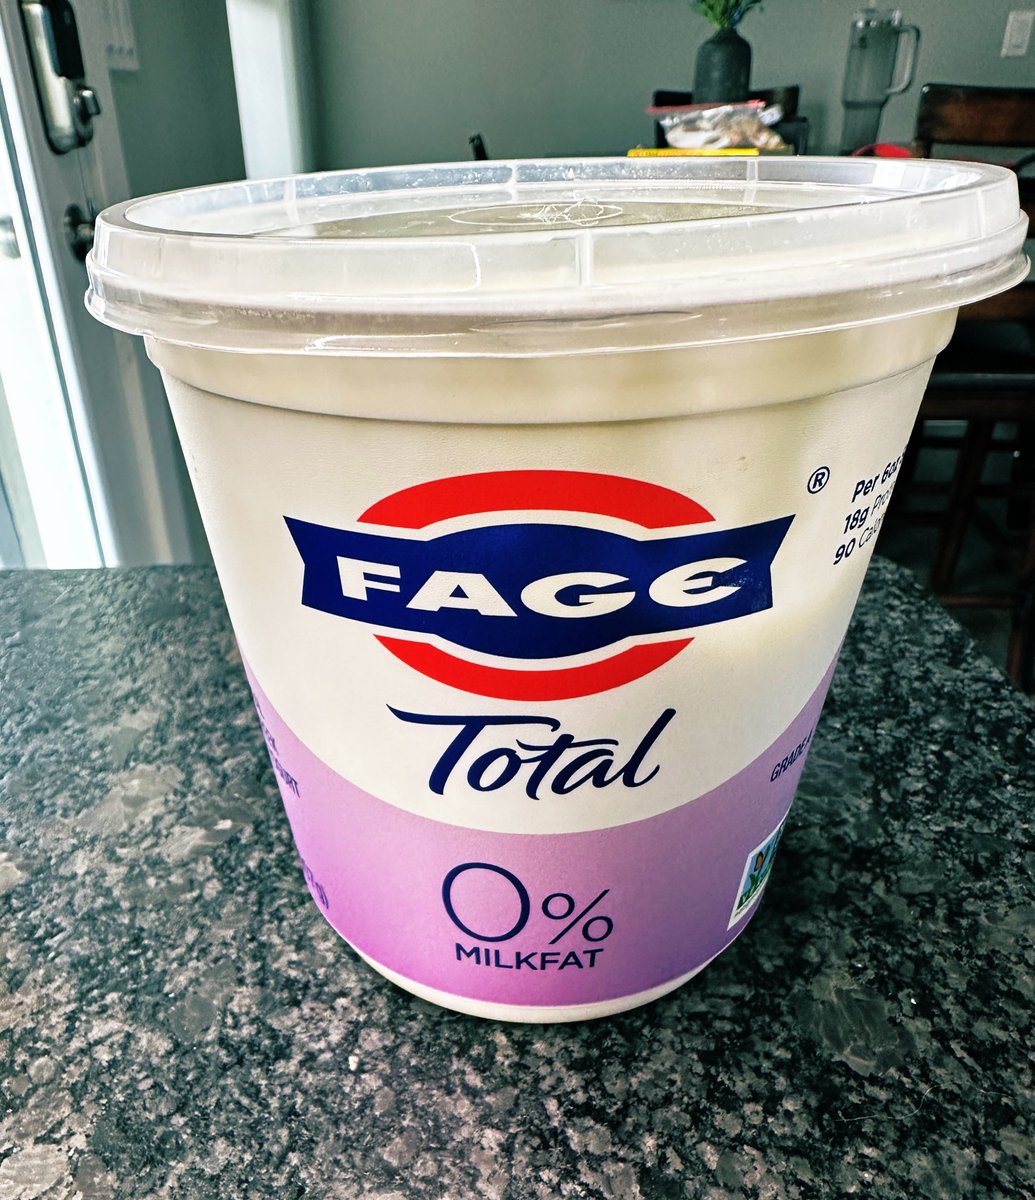 Did you know that one of these containers contains only 450 Calories and 90g of protein and is easily consumed plain or mixed with whey power, berries, fruit, honey, or mixed with hot sauces and salsa for perfect high protein dips?